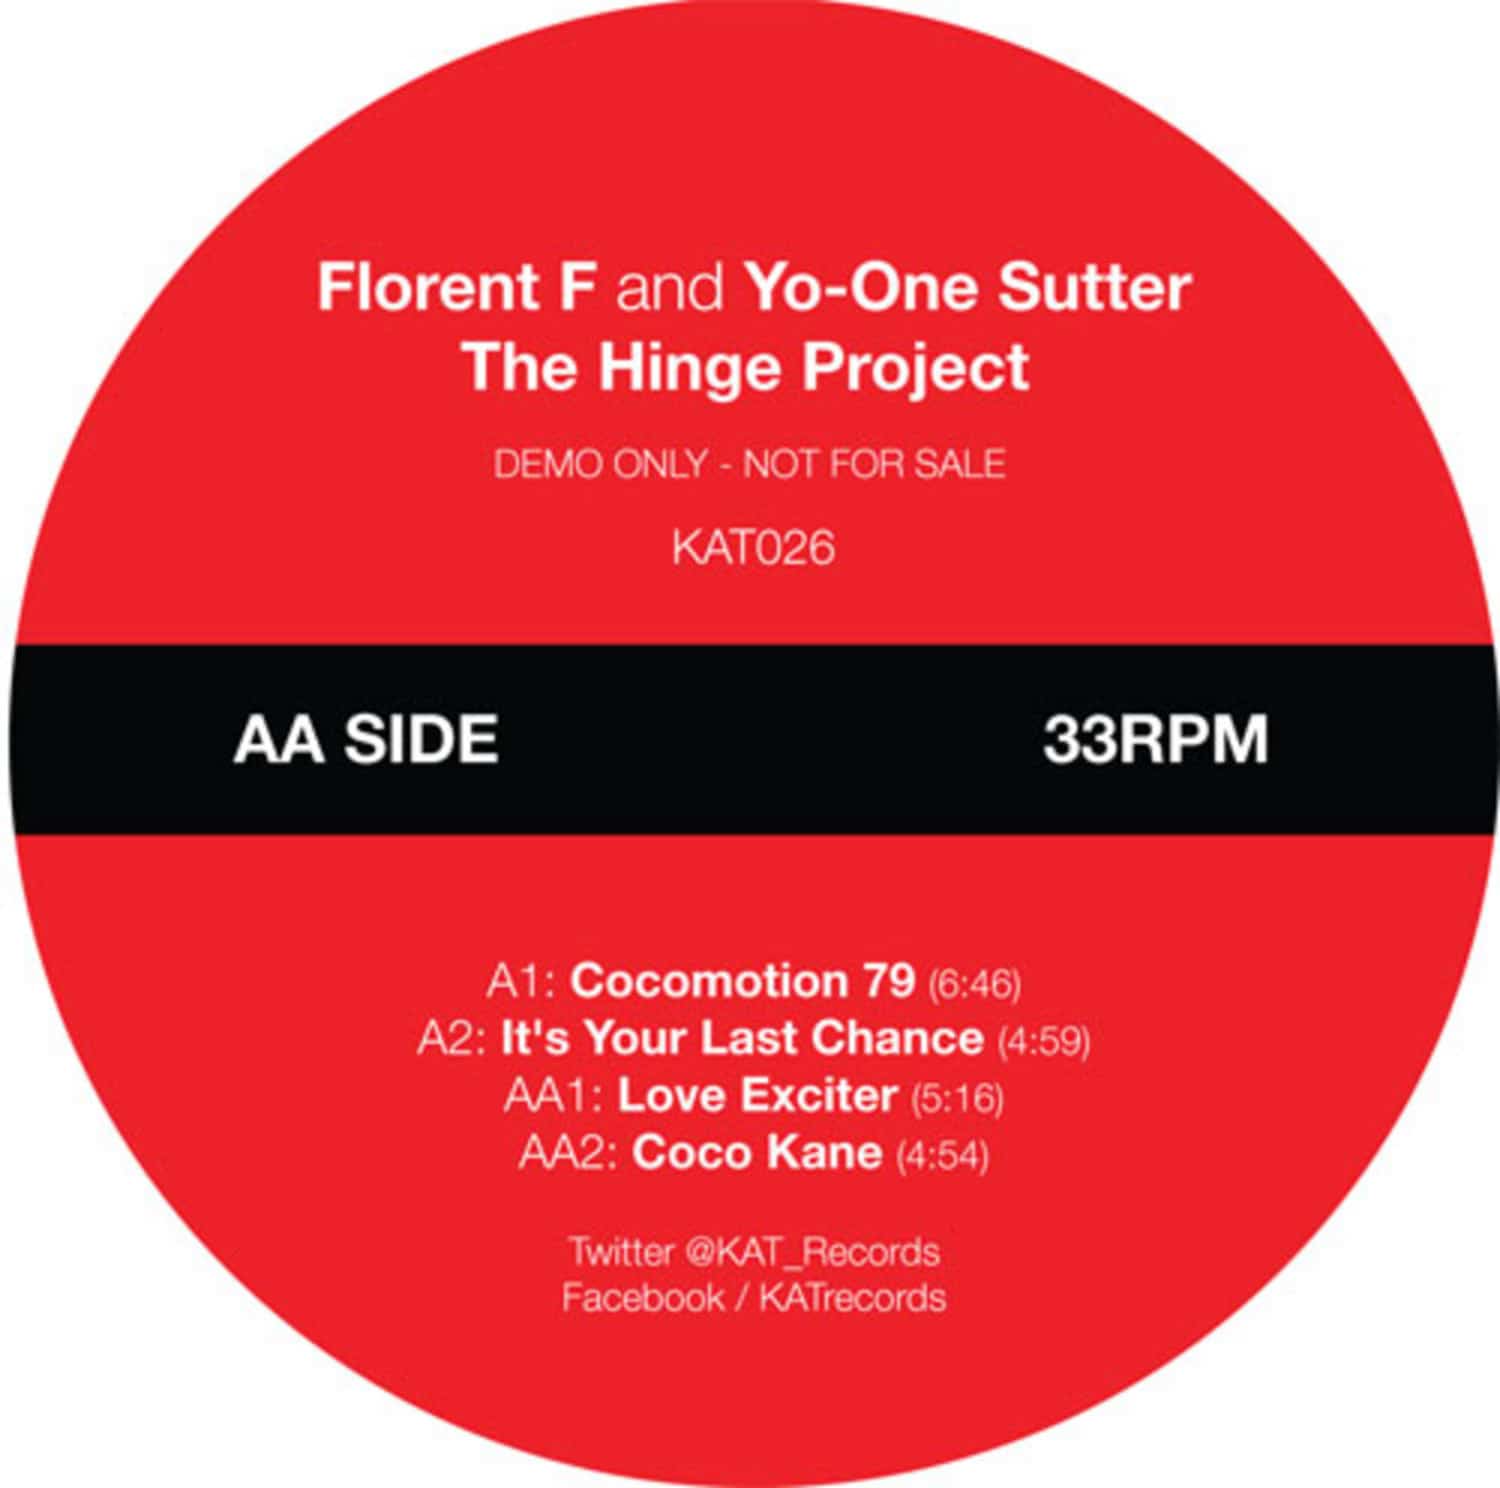 Florent F And Yo-One Sutter - THE HINGE PROJECT